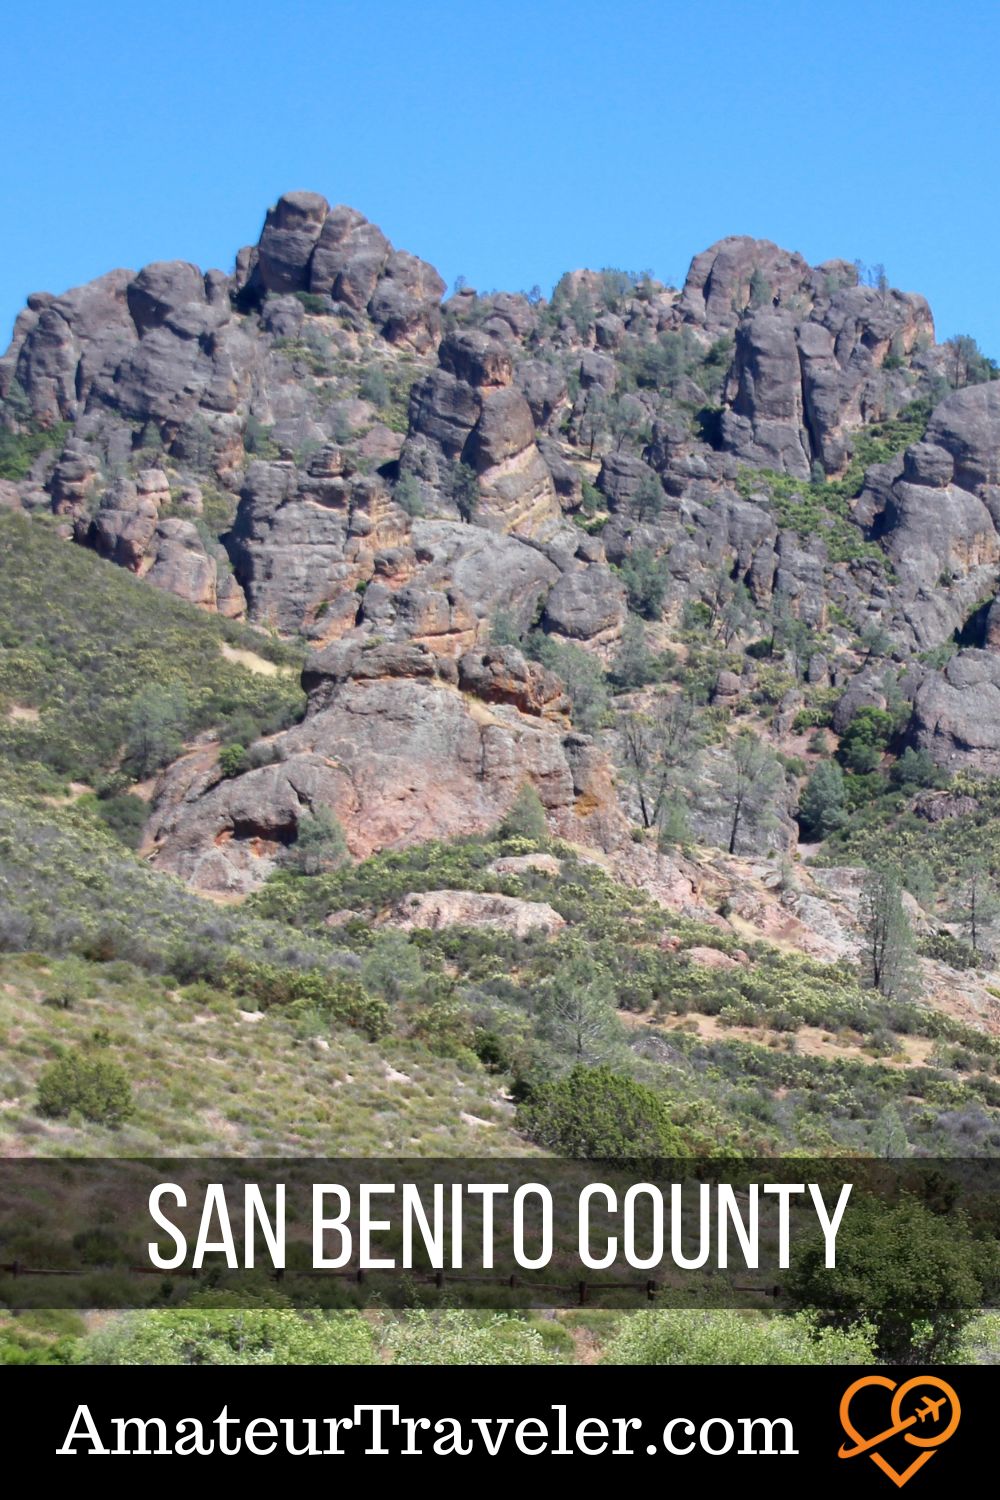 Things to do in San Benito County - Holister and San Juan Bautista #california #sanbeintocounty #hollister #sanjuanbautista #travel #vacation #trip #holiday